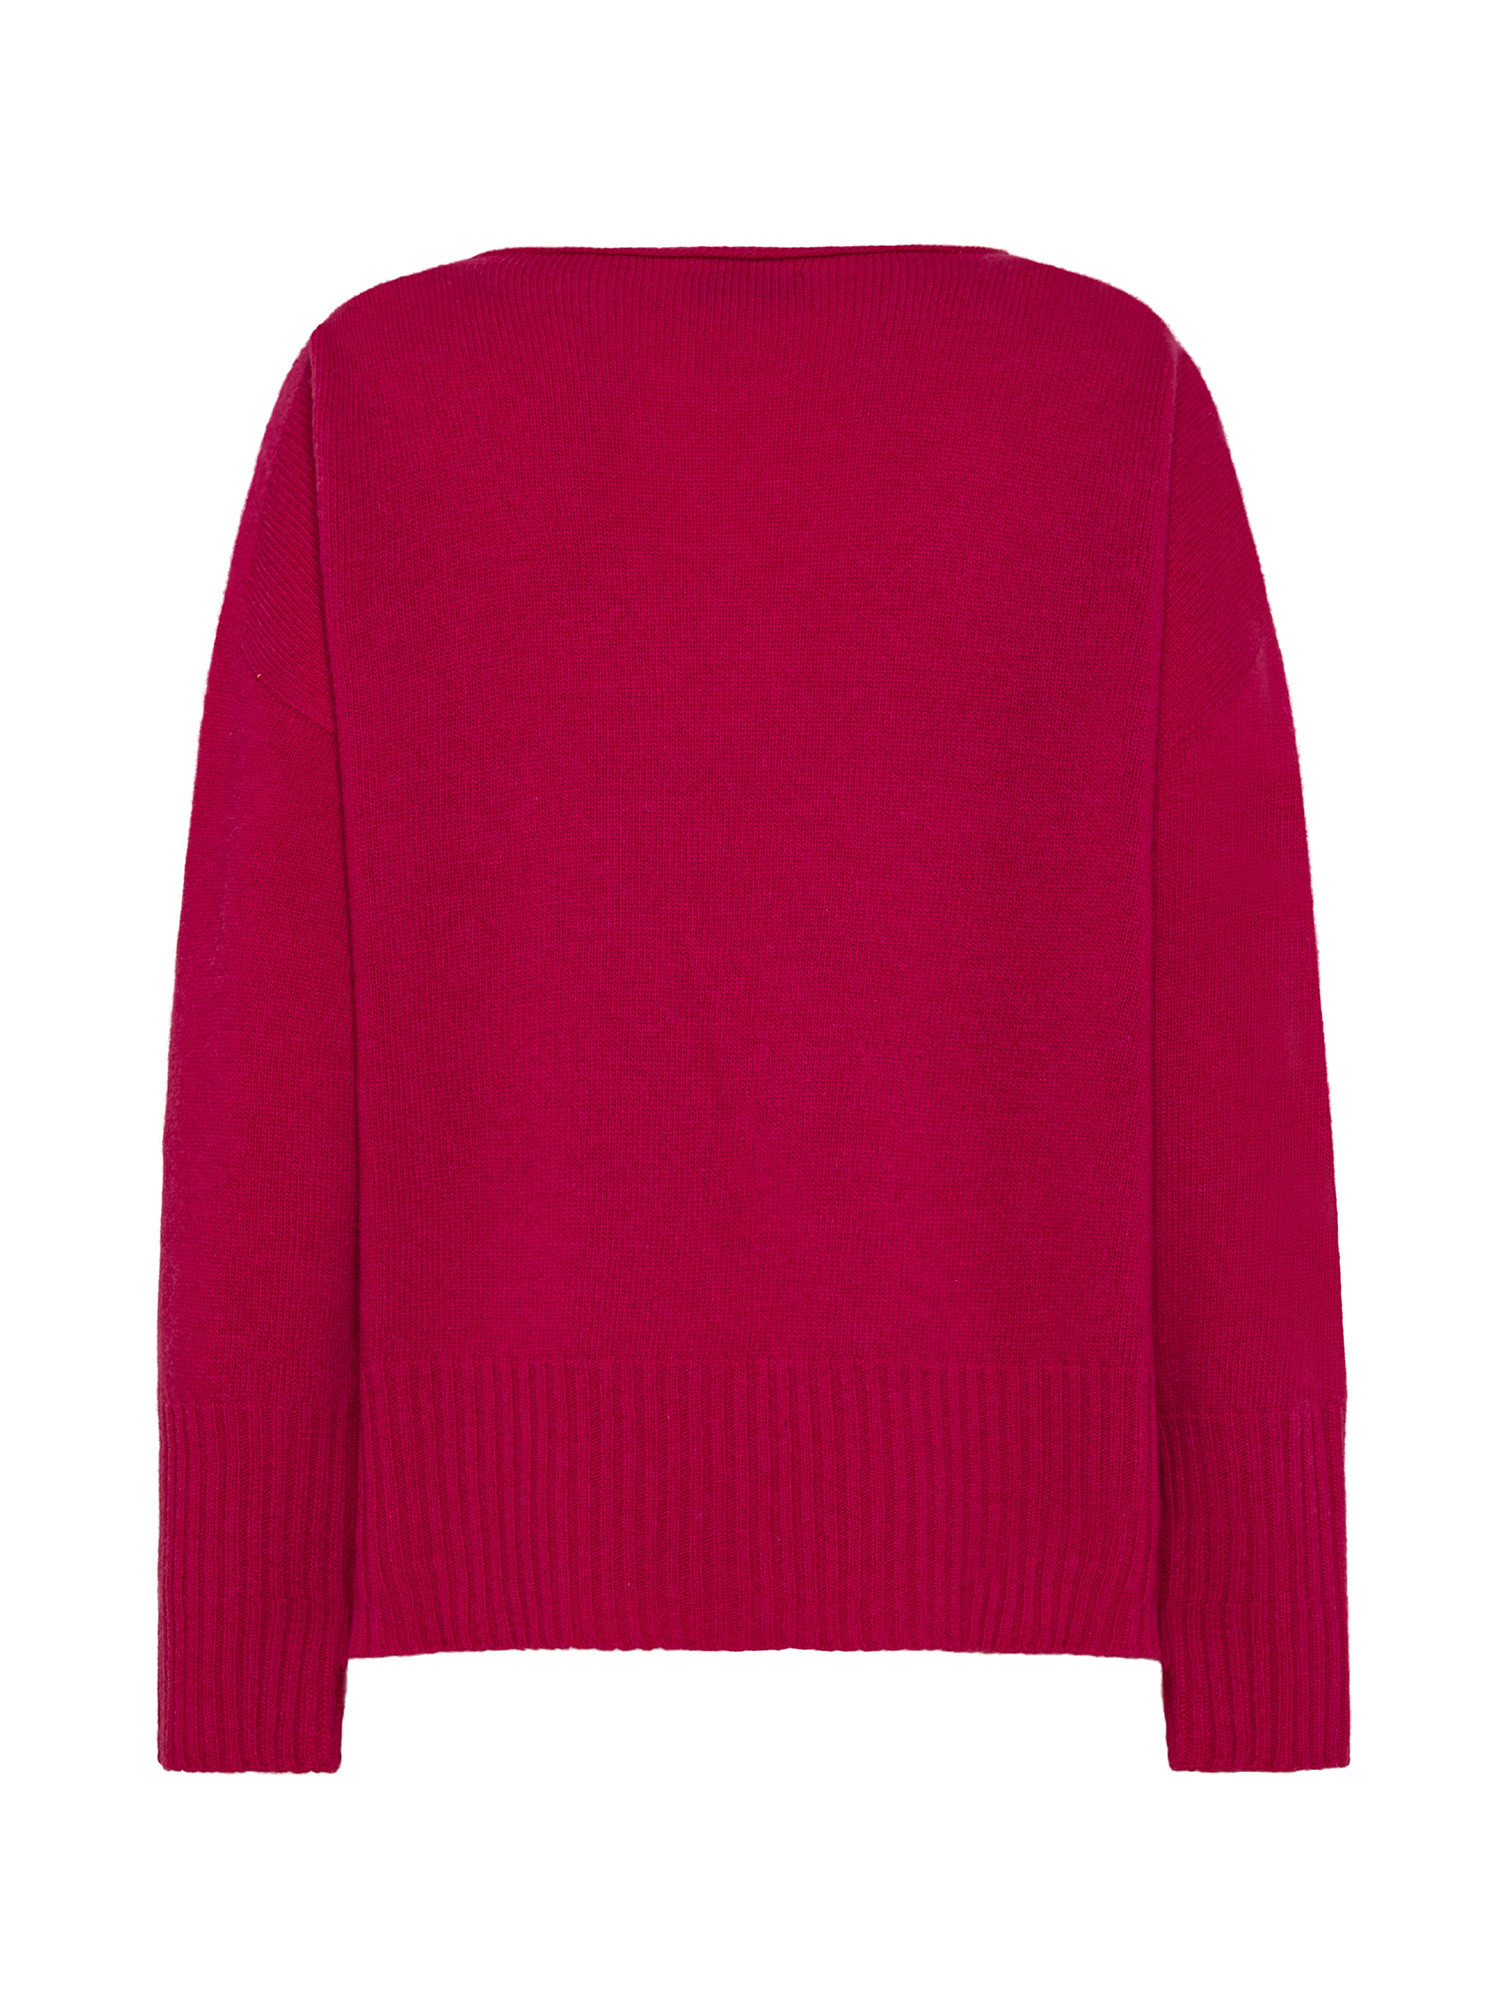 K Collection - Carded wool pullover, Pink Fuchsia, large image number 1